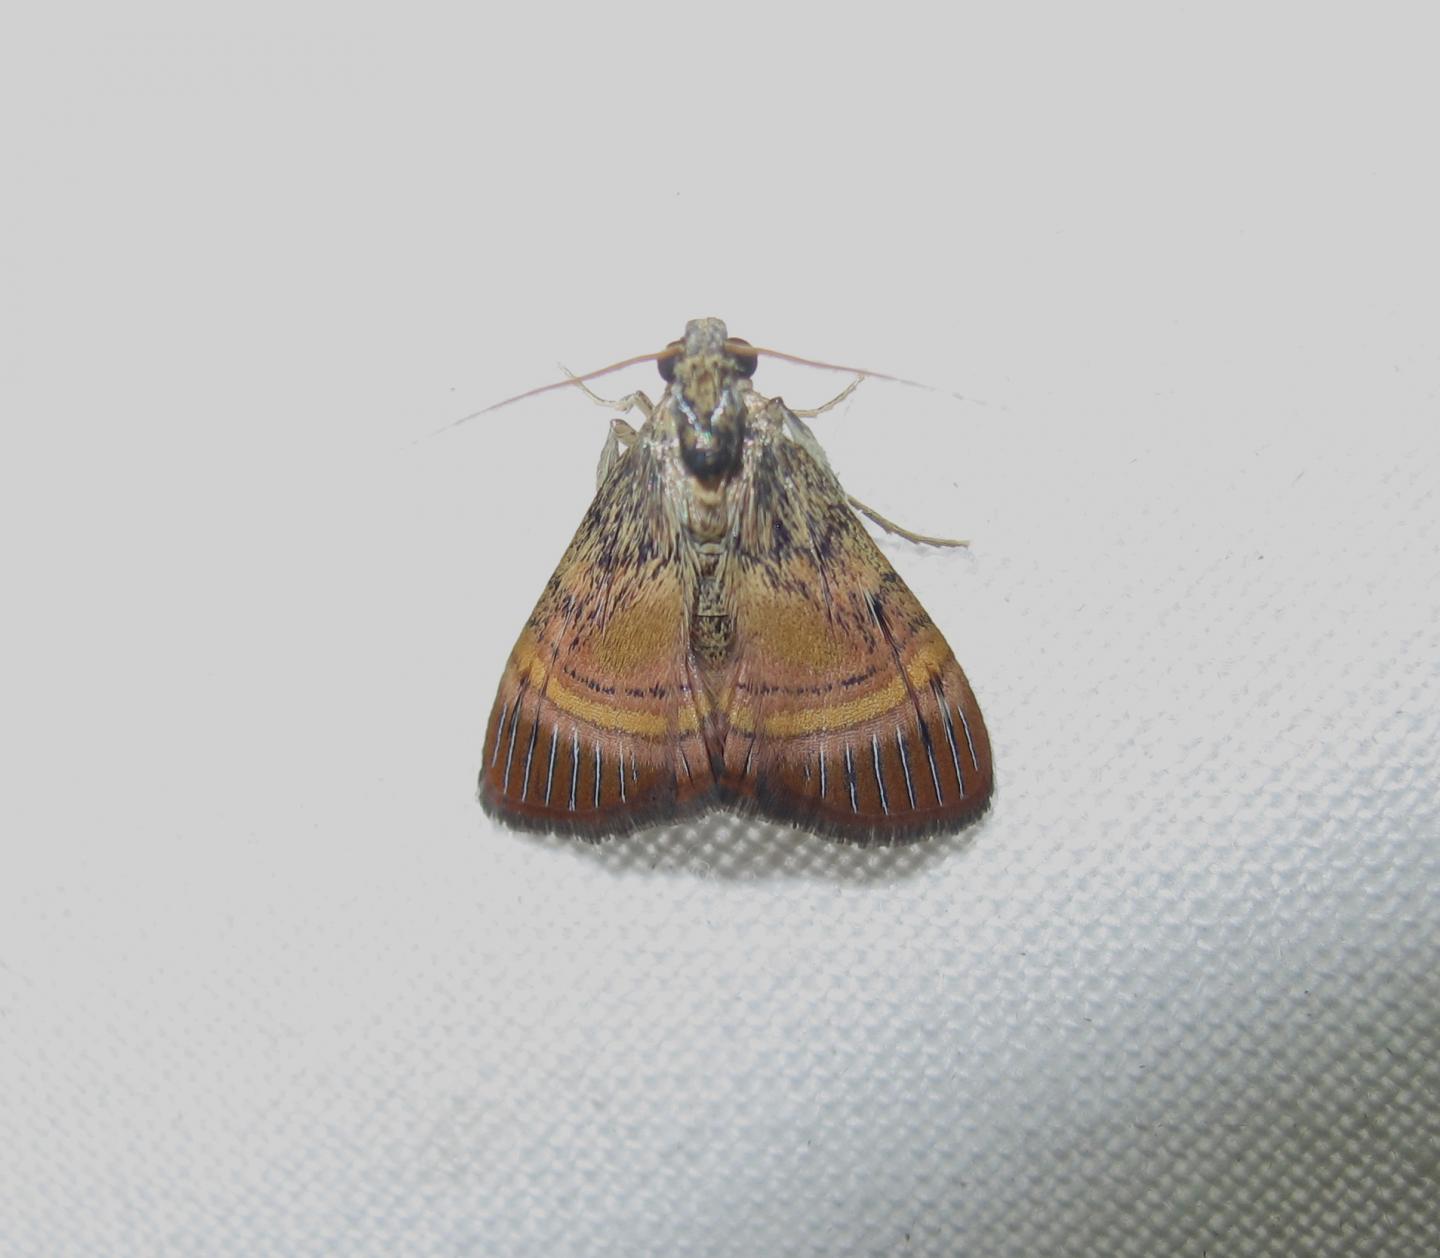 One of the Studied Moth Species in Tectiform